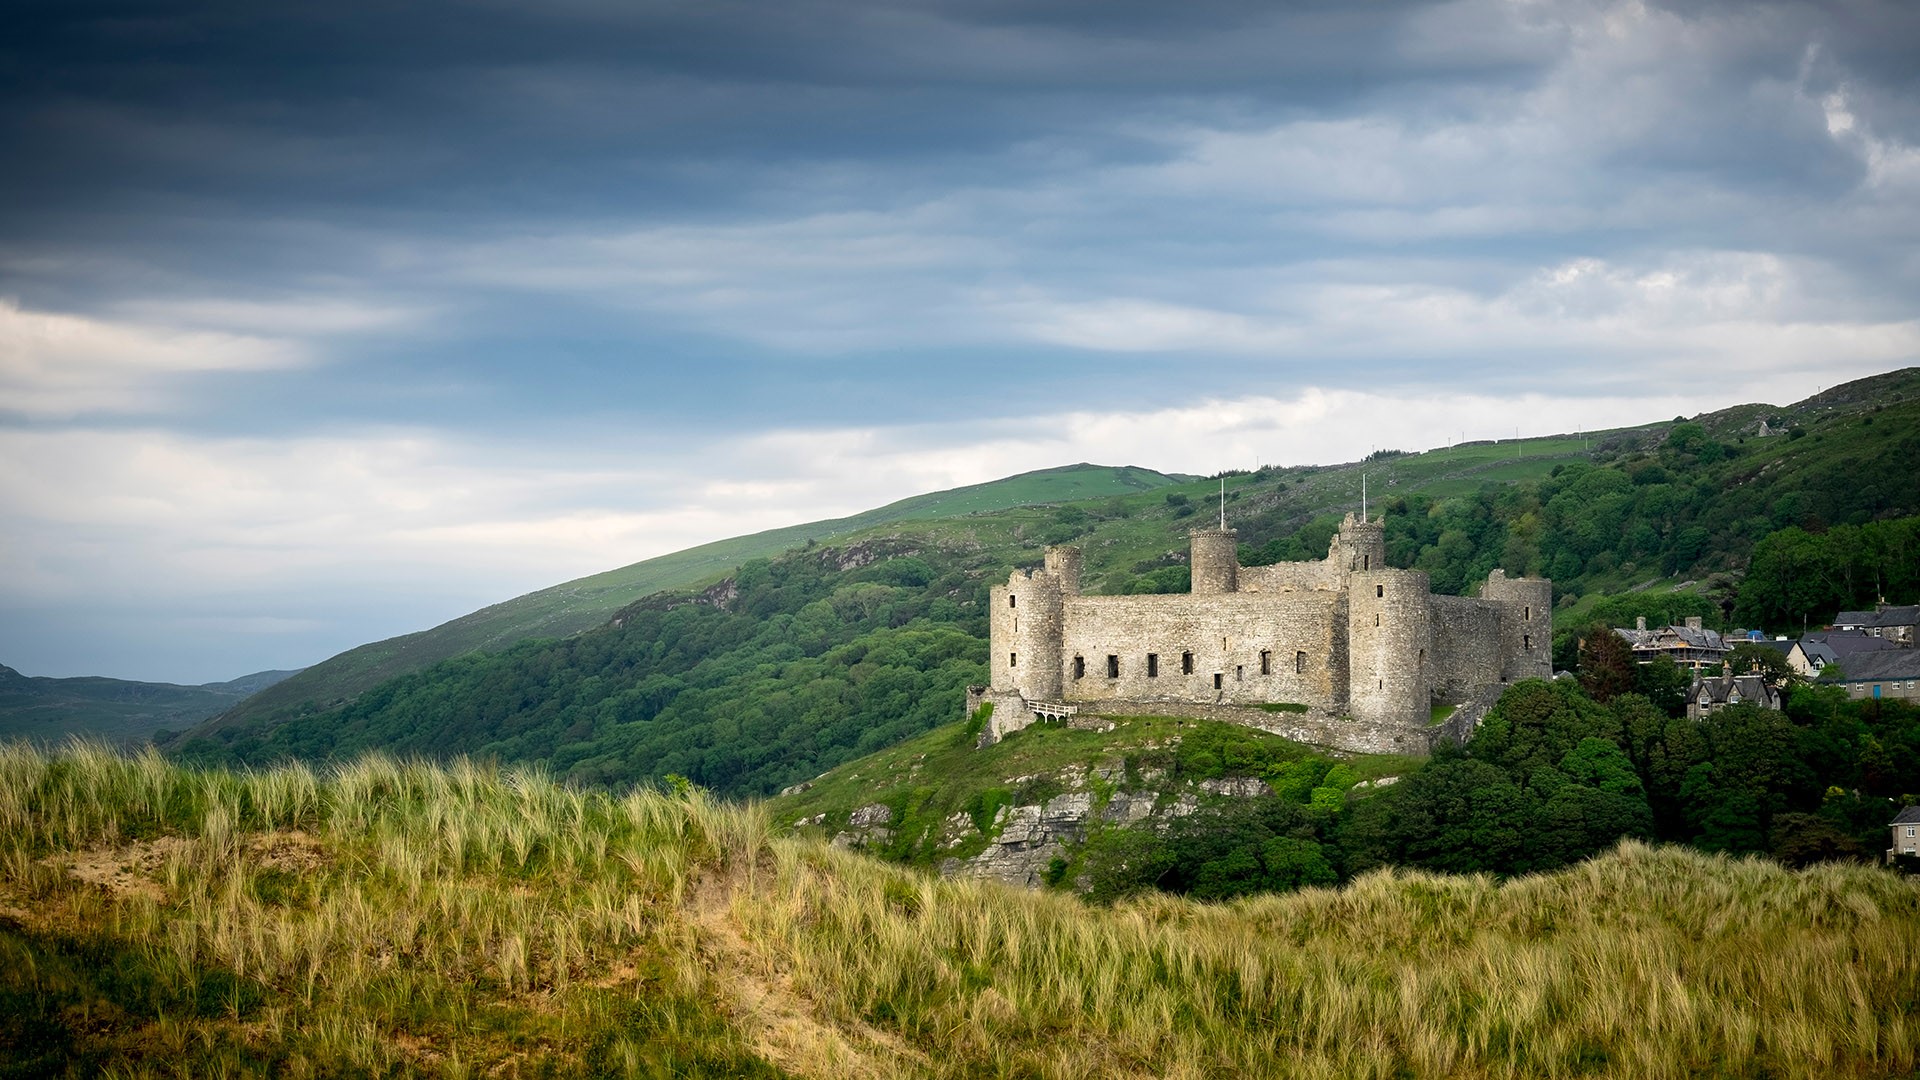 A view of Harlech castle from the sand dunes, Gwynedd, Wales, UK ...